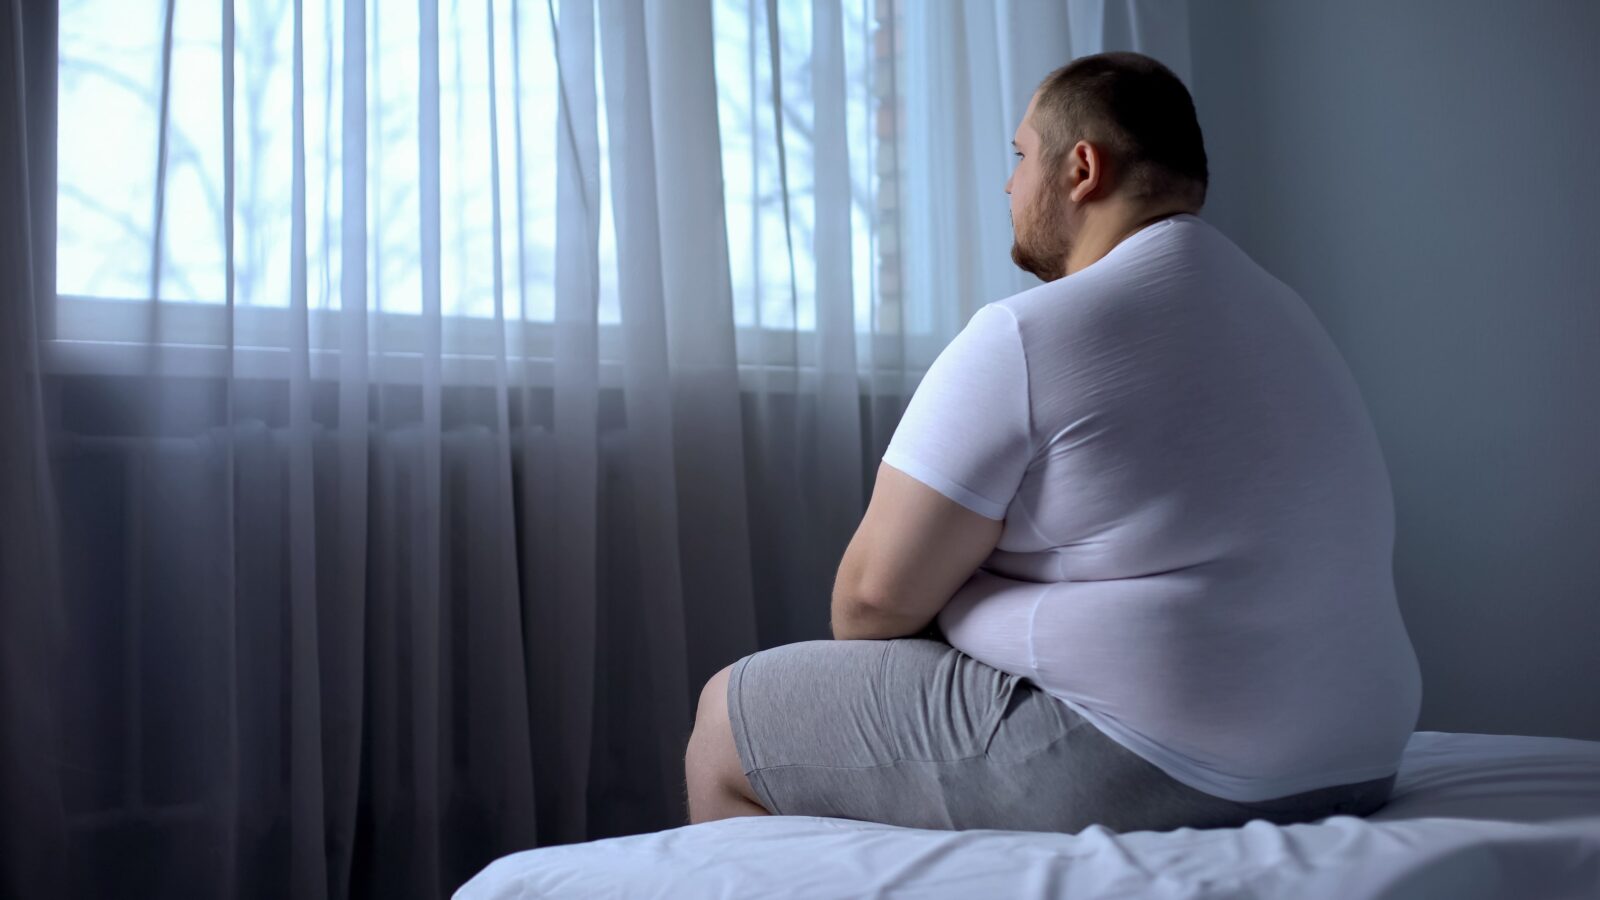 obese man sitting on bed and looking out the window